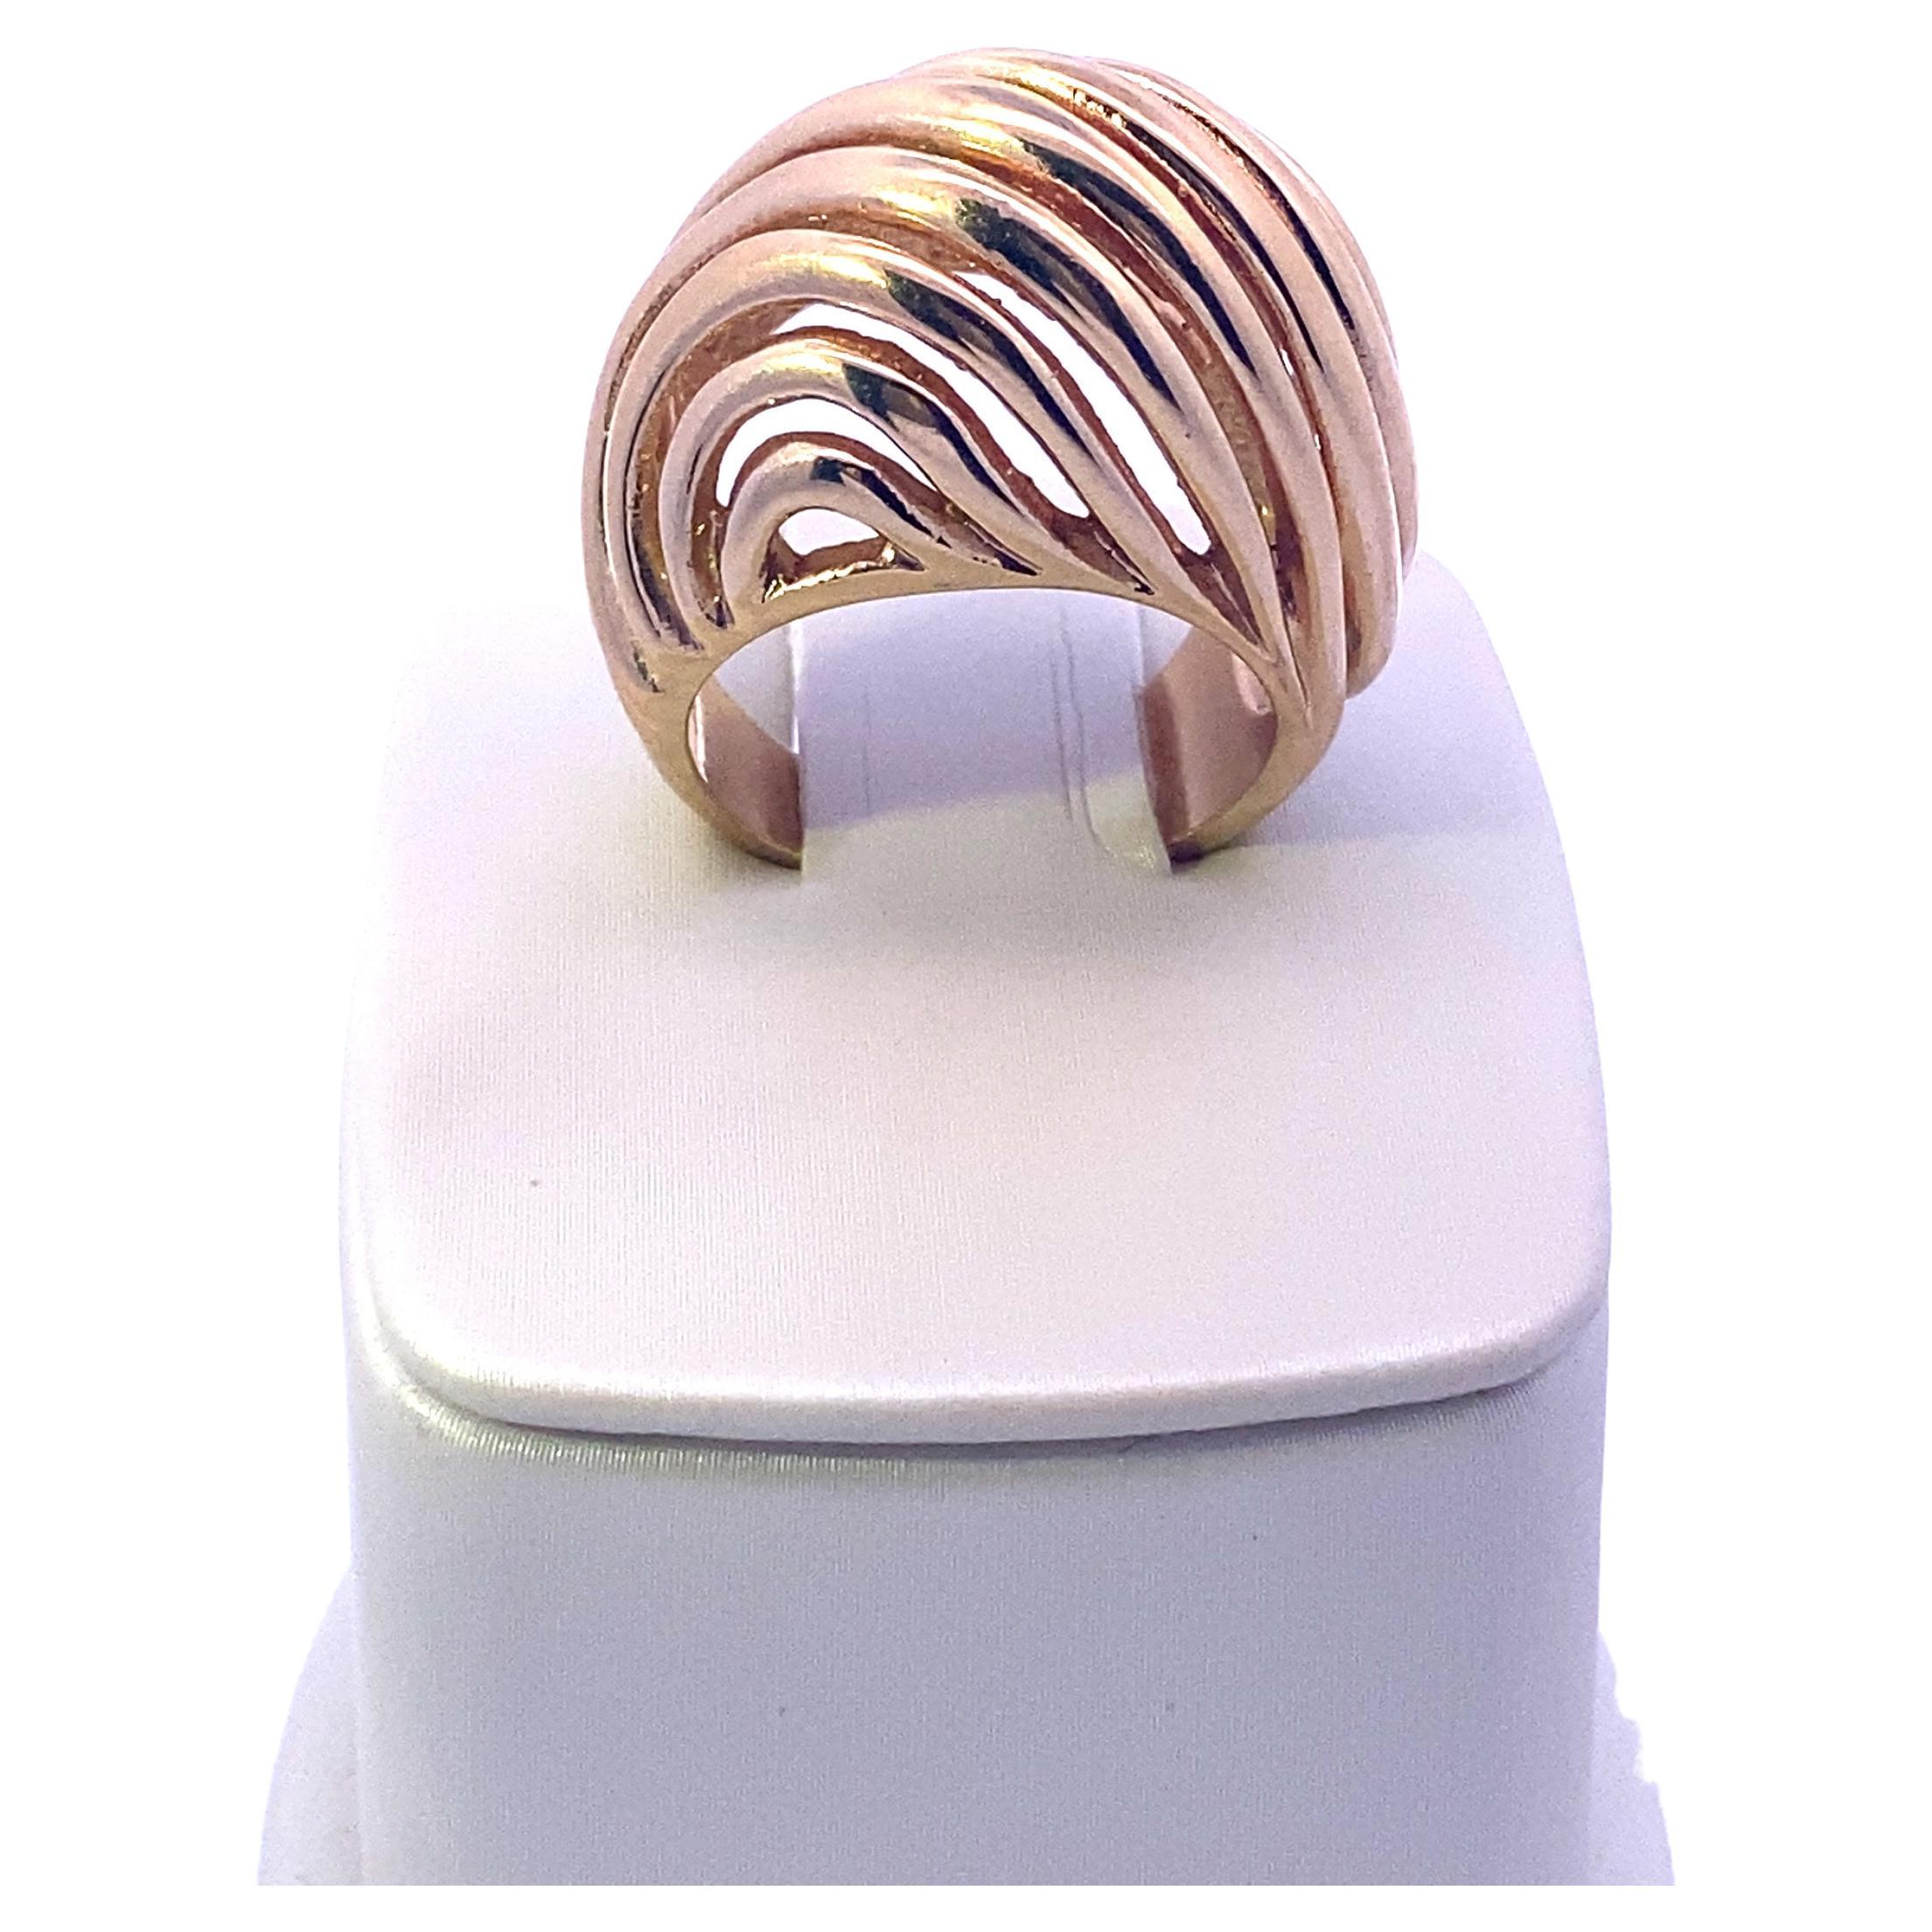 Yellow Gold Dome Ring